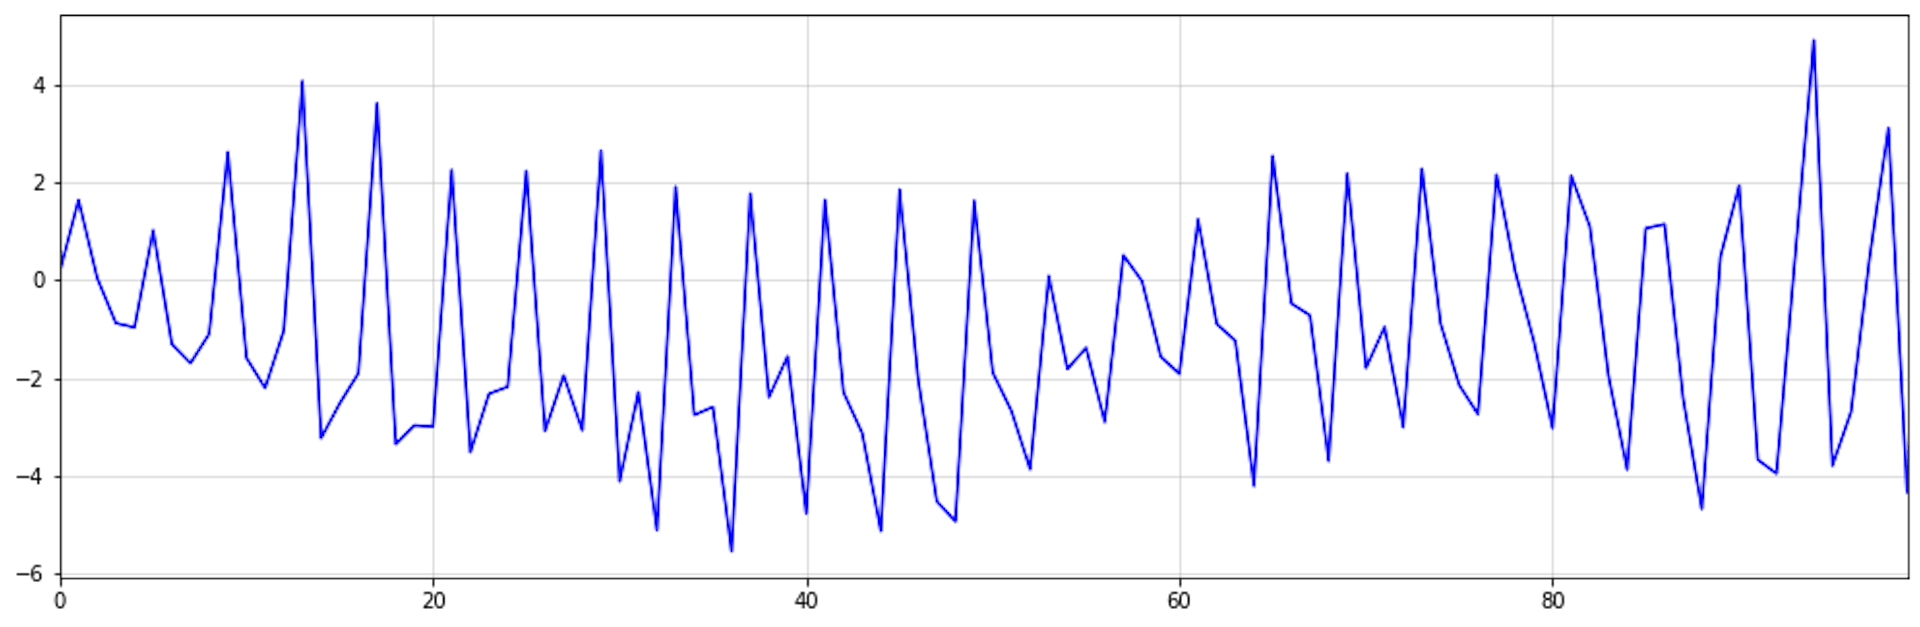 Seasonality of order 4 from a purely i.i.d. process